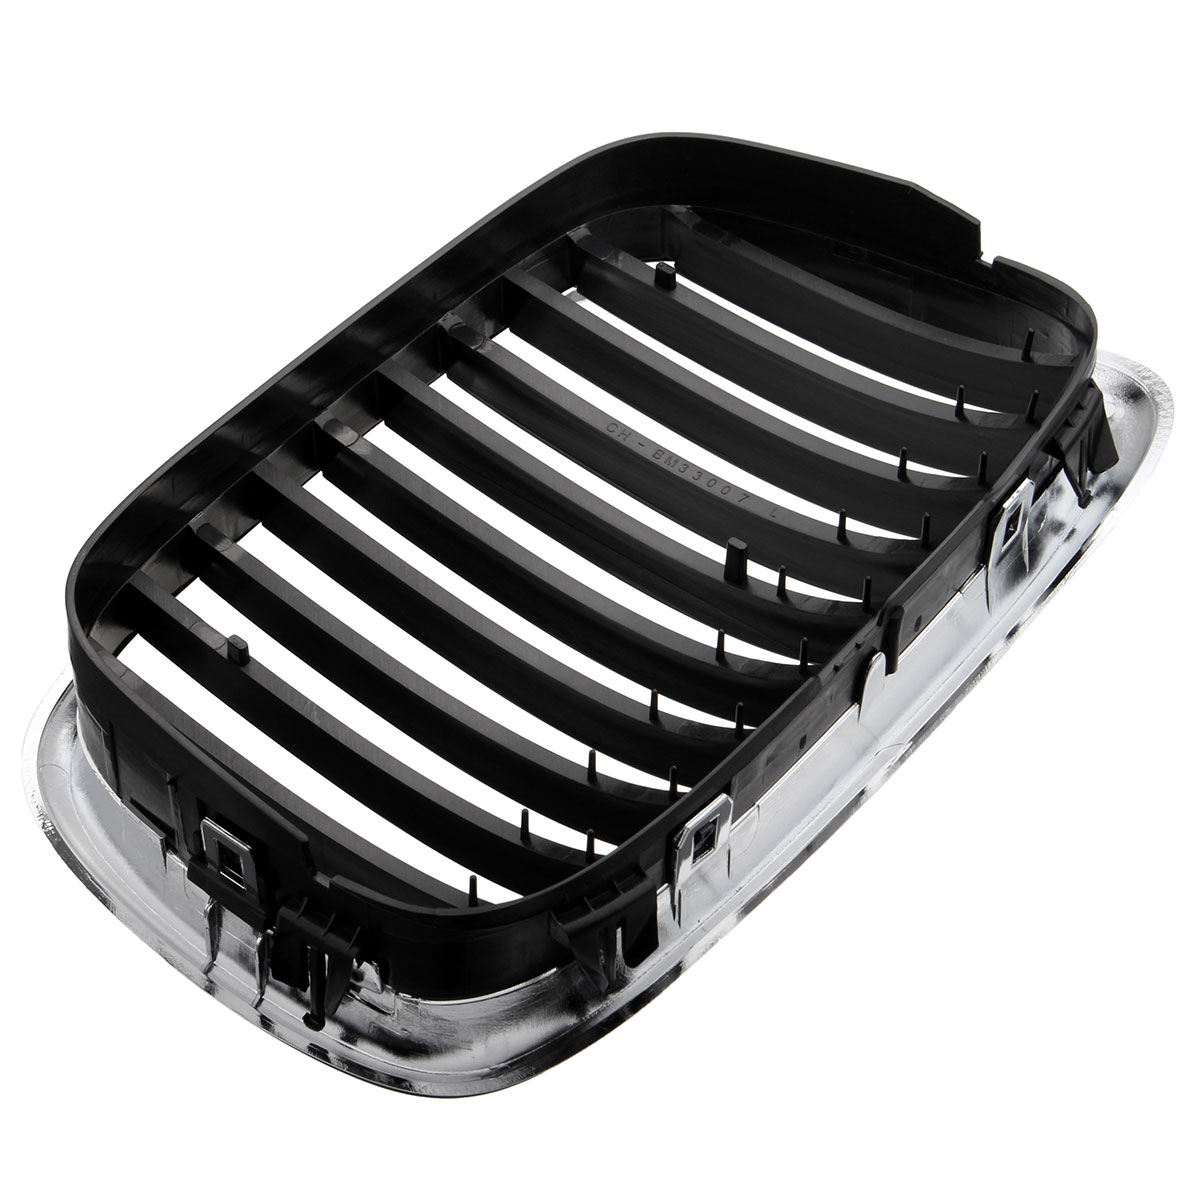 Chrome Black Front Grille Grill for BMW E39 5 Series 525 530 535 540 M5 1995-2003